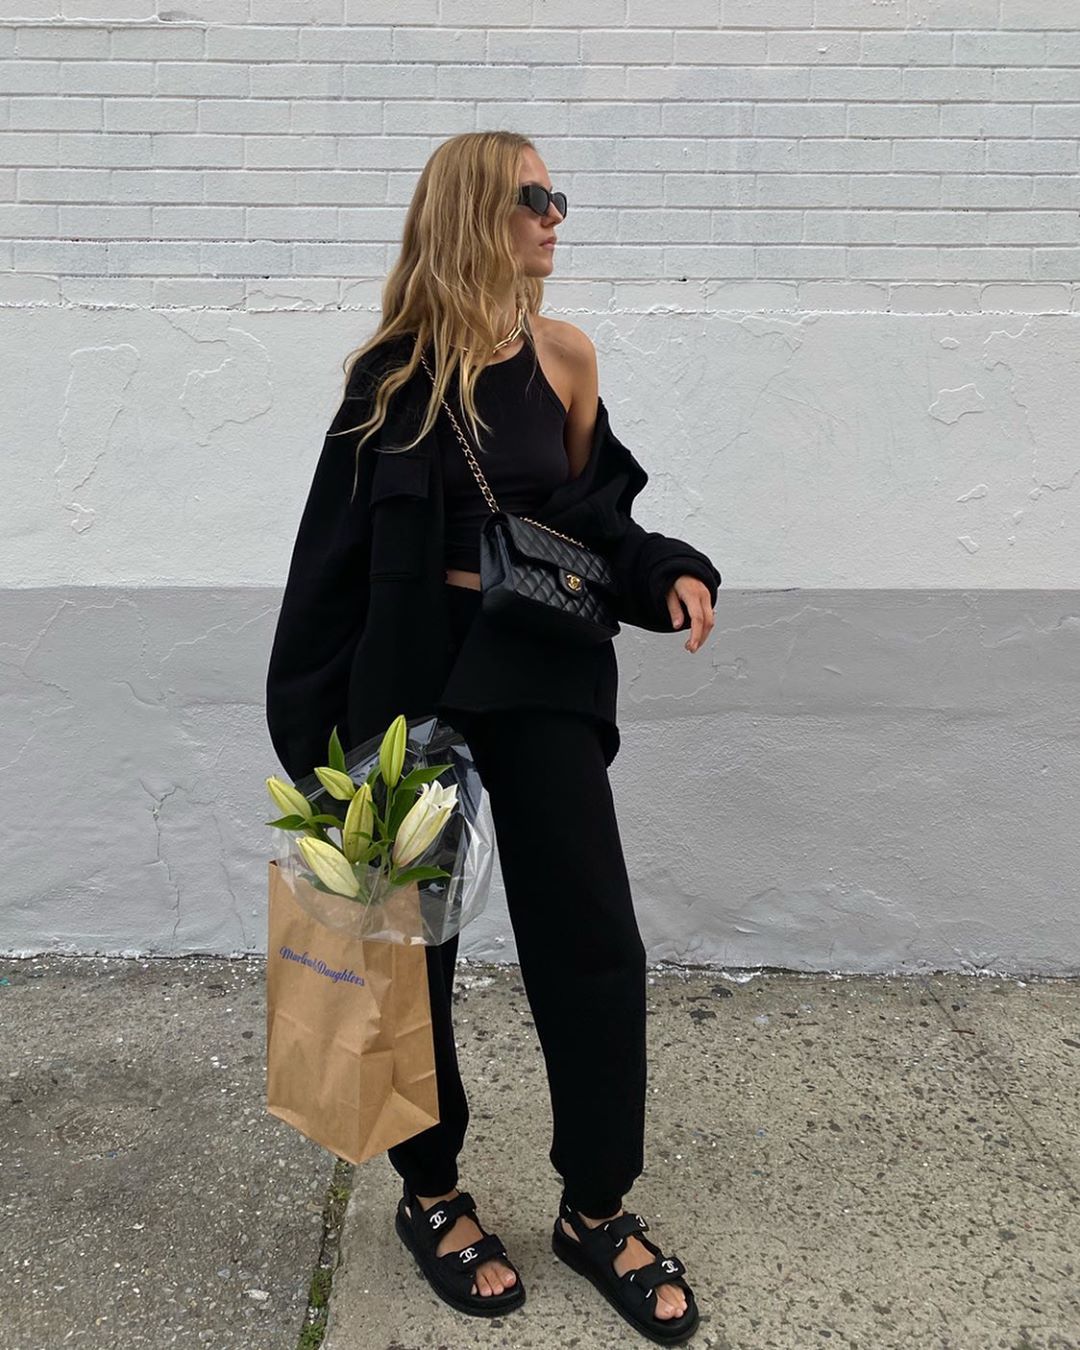 Le Fashion: The All-Black Outfit I Want to Live In Right Now